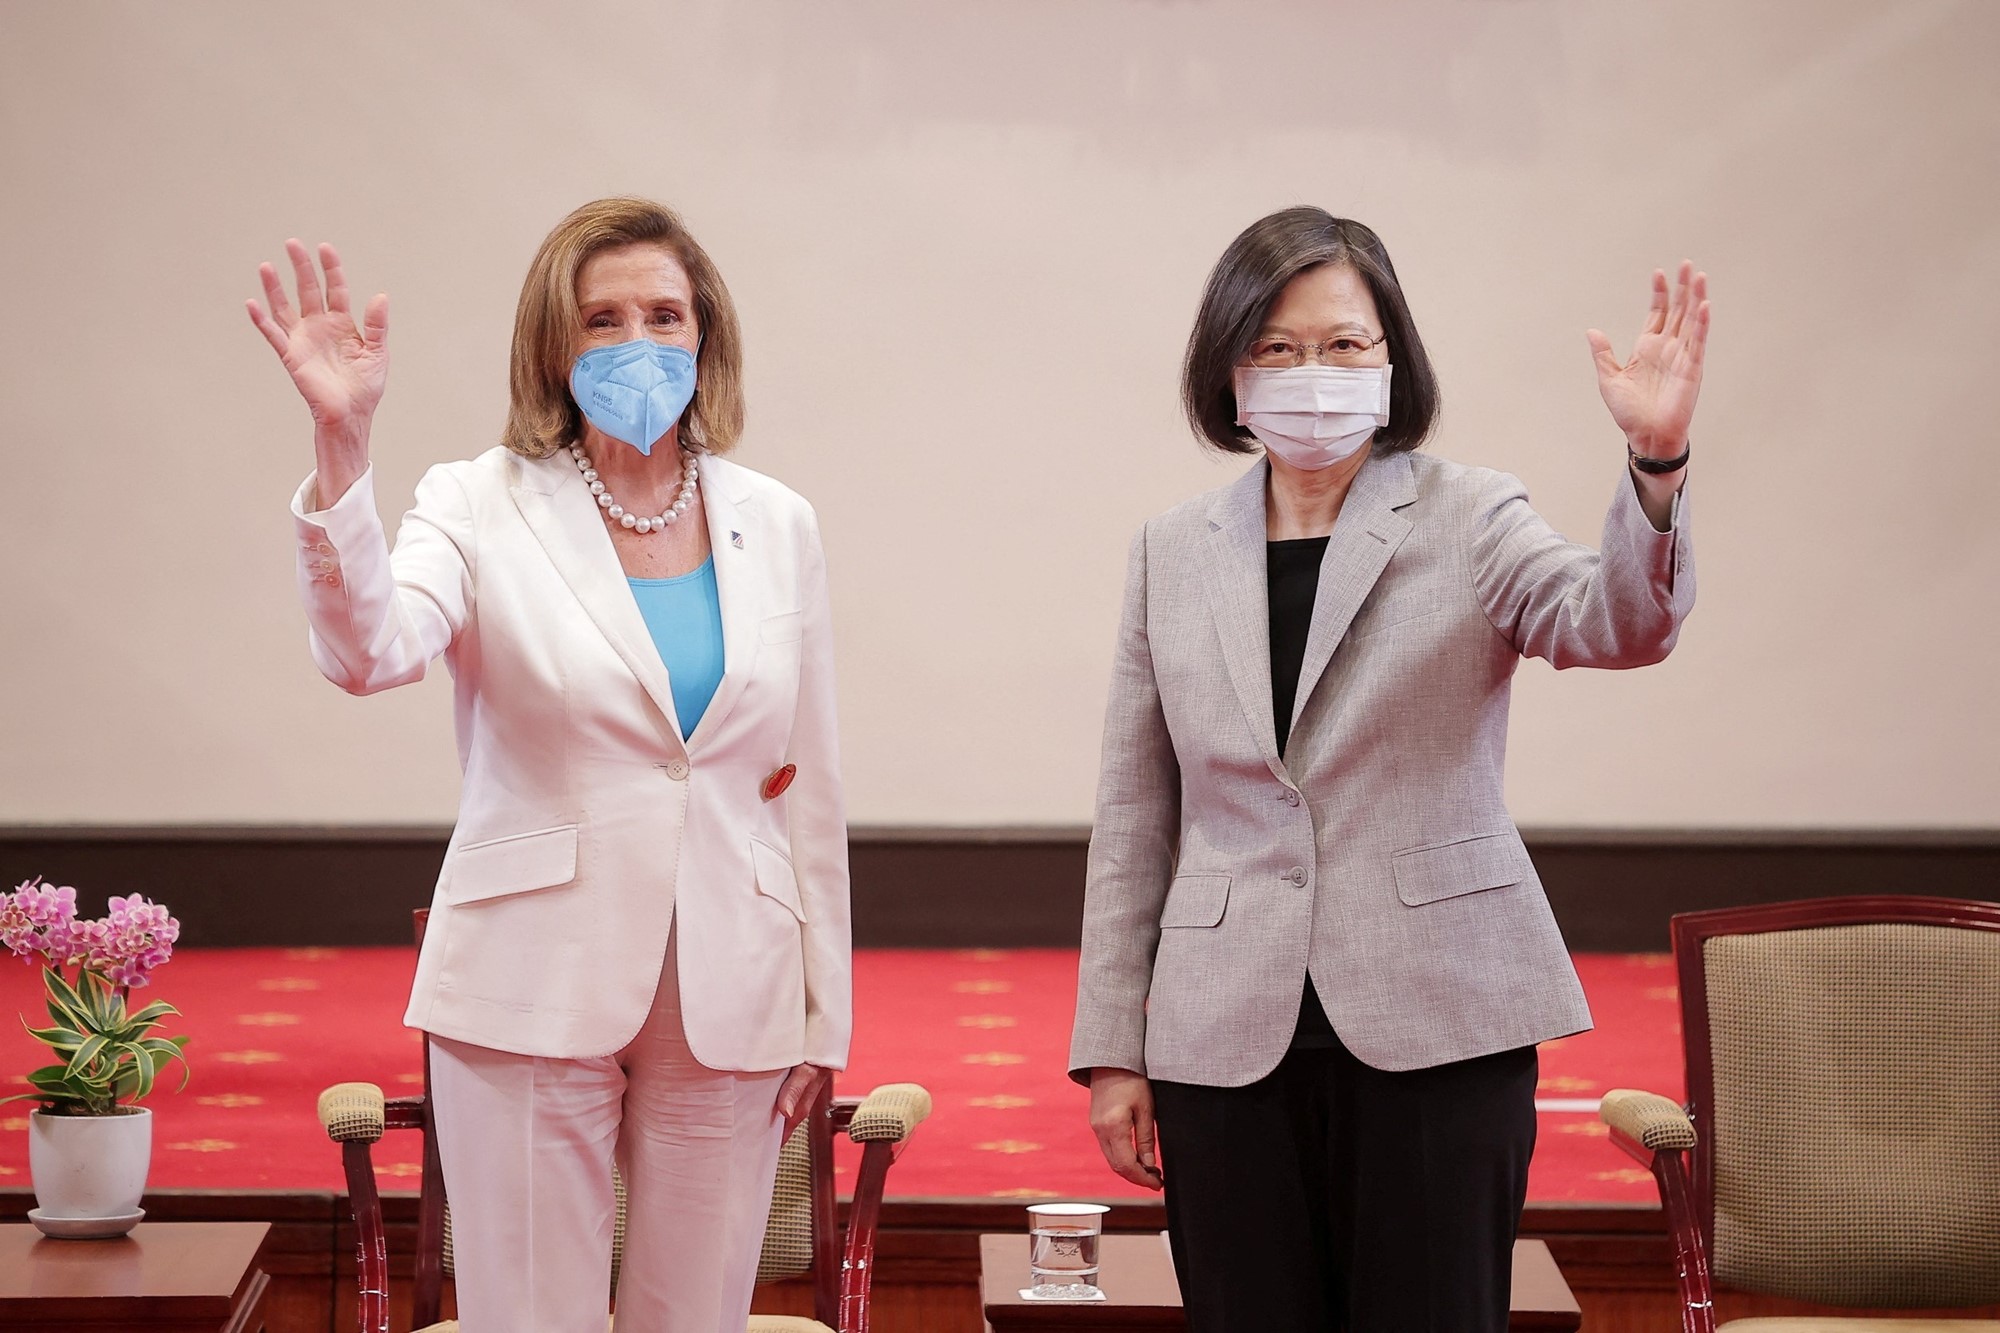 Two women wearing suits and face masks wave.